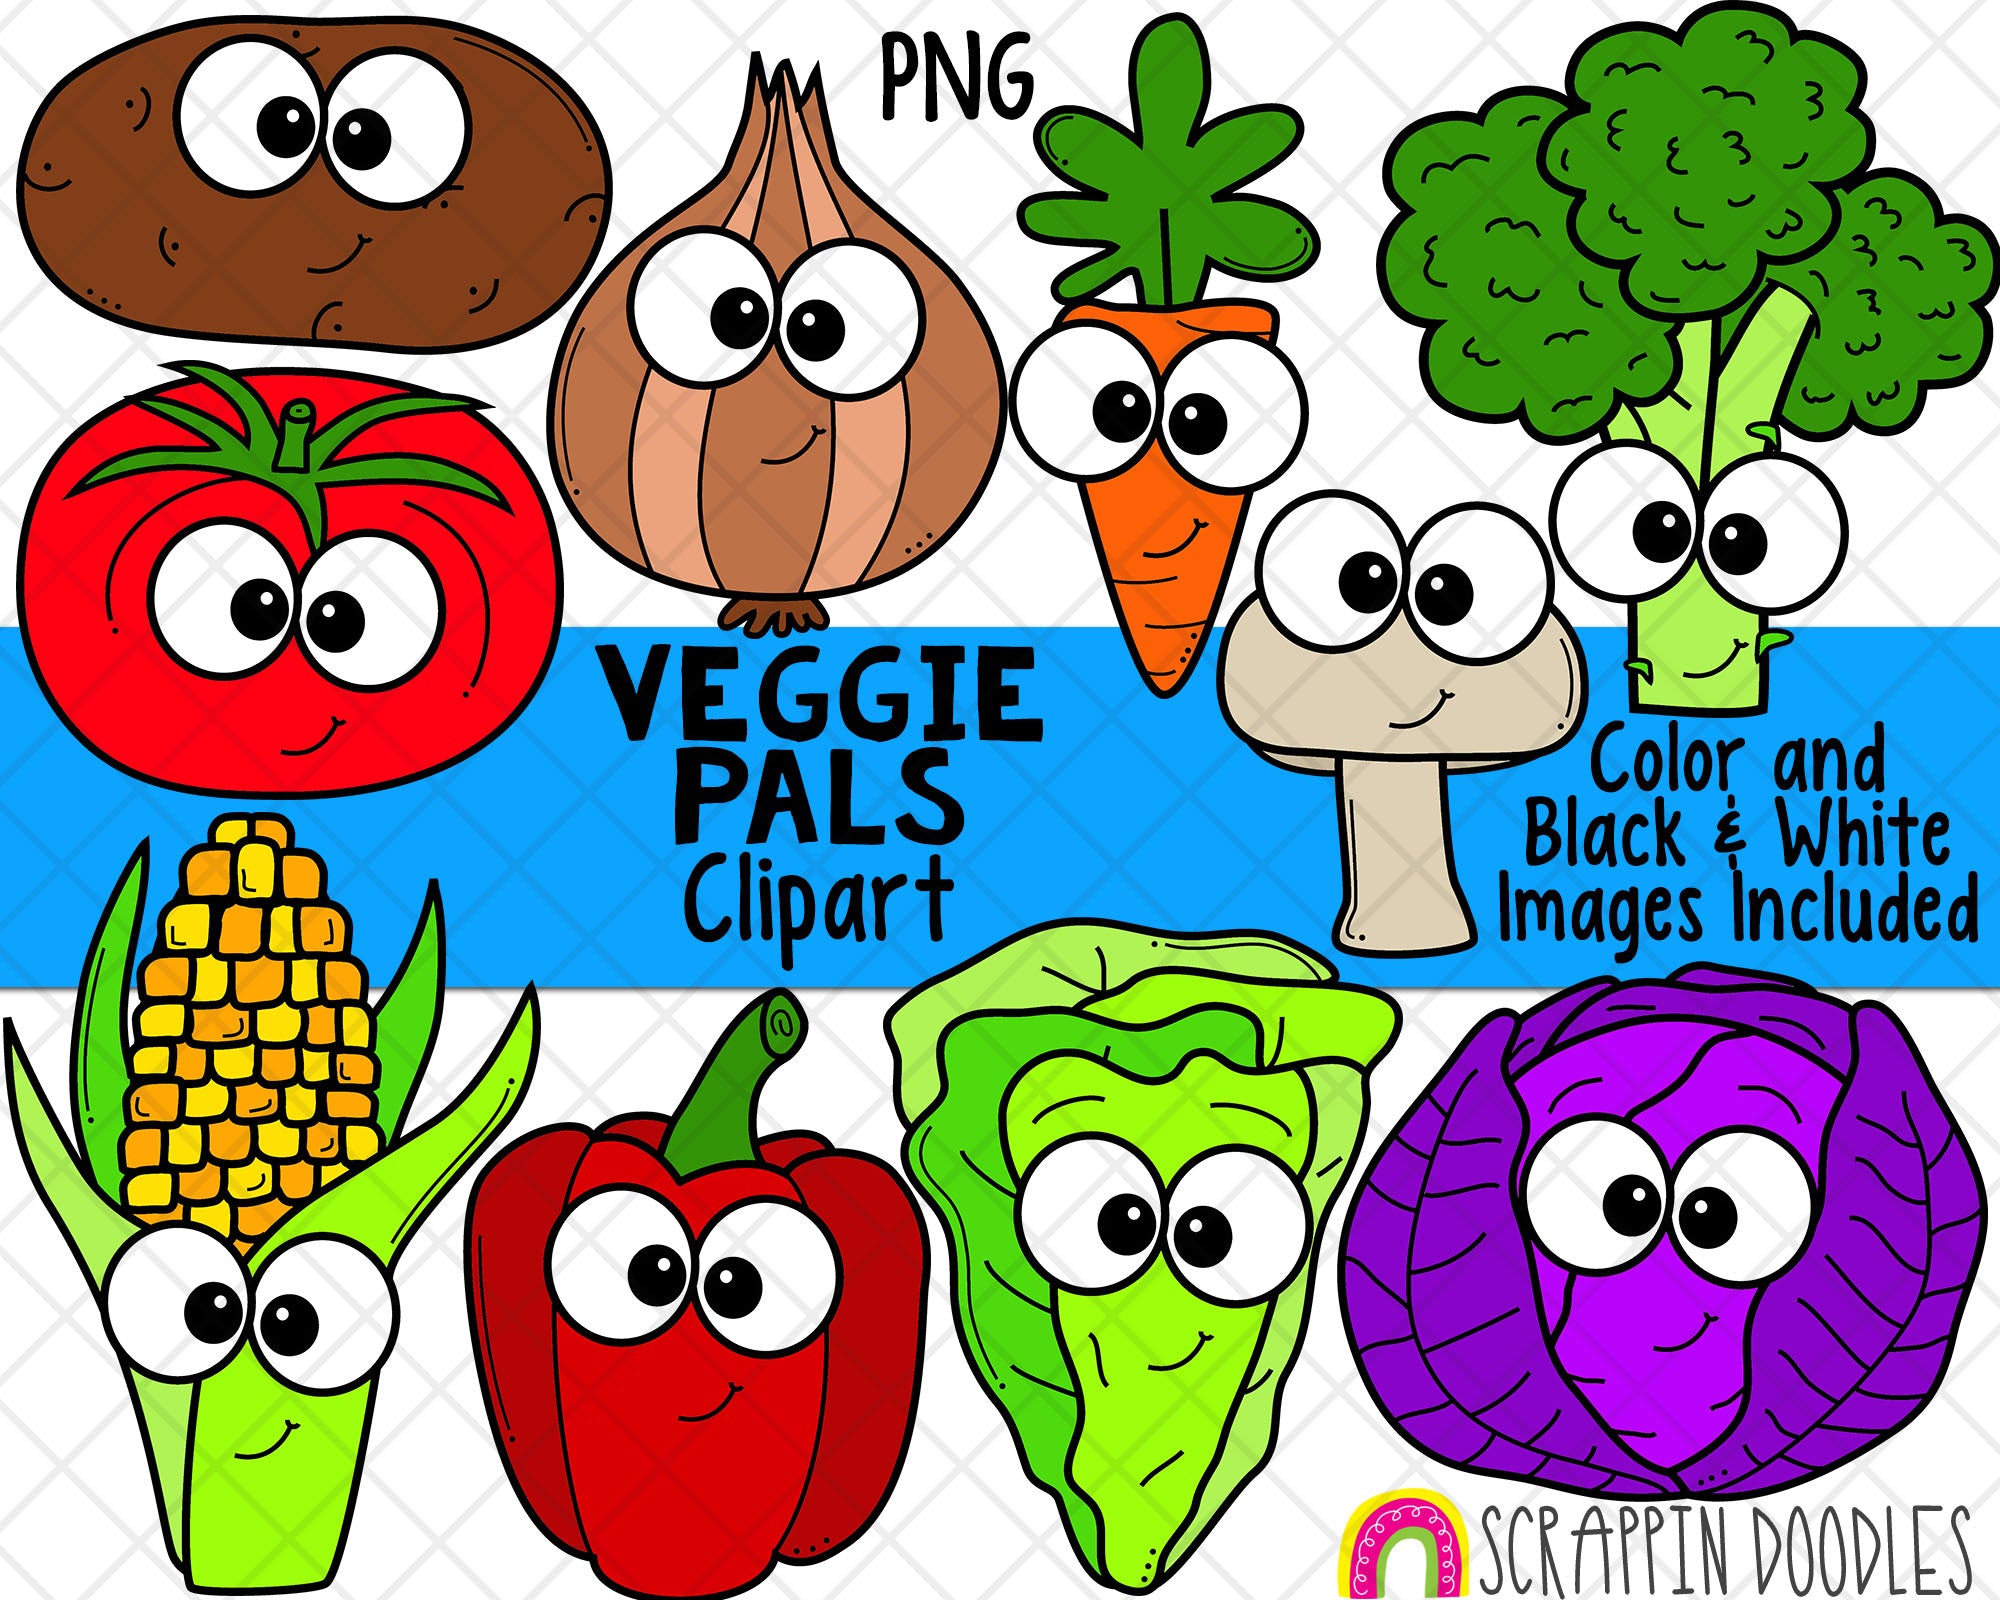 cartoon fruits and vegetables clipart